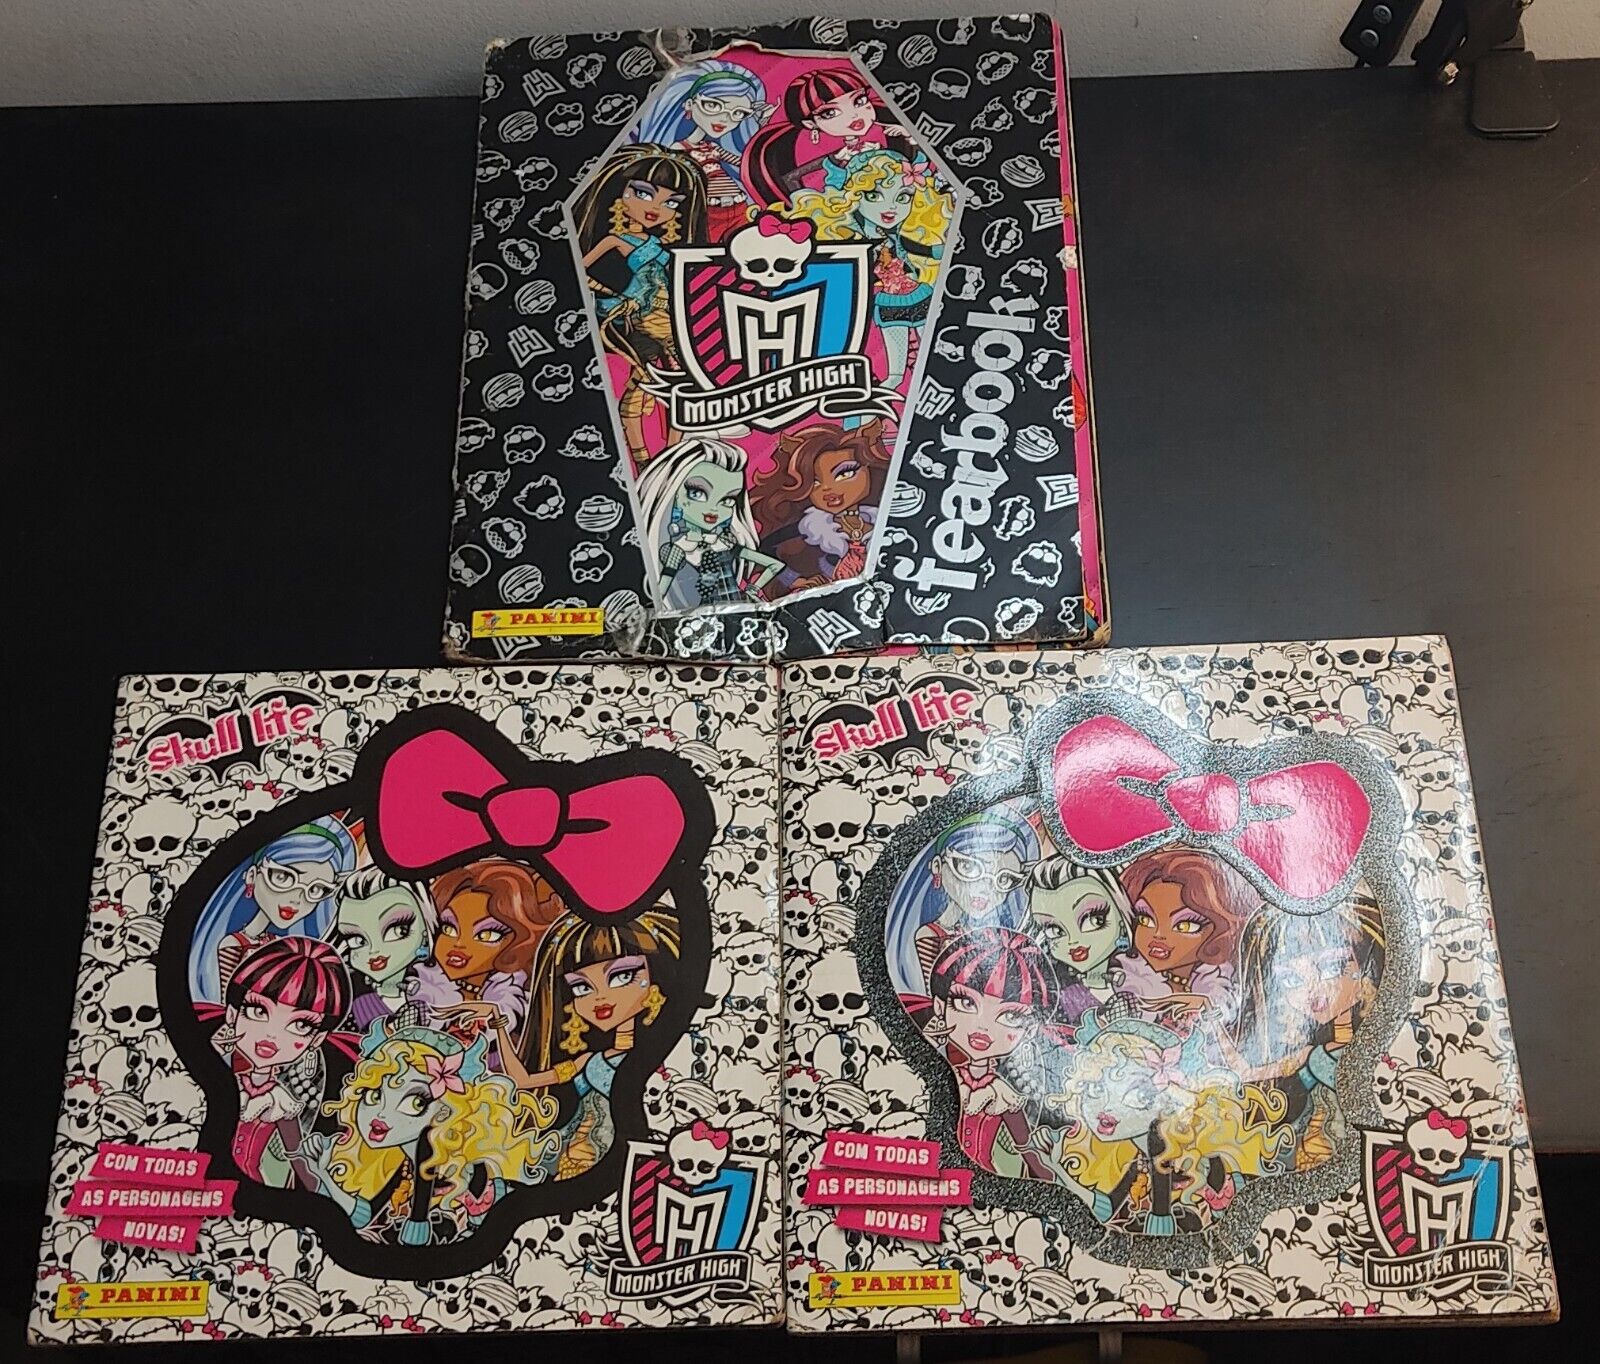 3 X Panini Albums - Monster High Fearbook & Monster High Skull Life (2x)